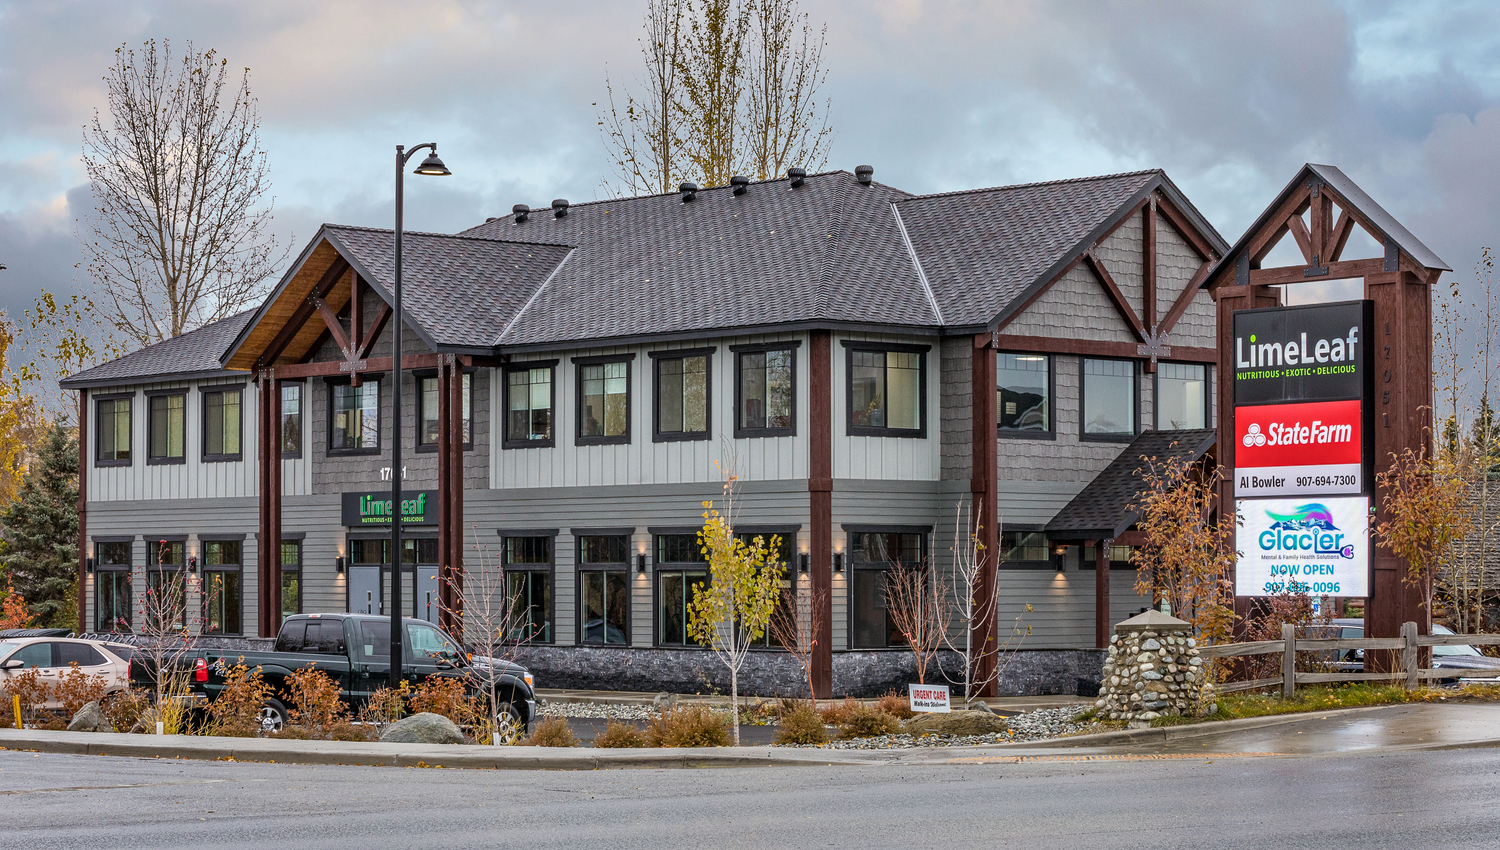 Gallery Photo of Office Building at 17051 Mercy Drive Ste 204 Eagle River, AK 99577. Lime Leaf Building